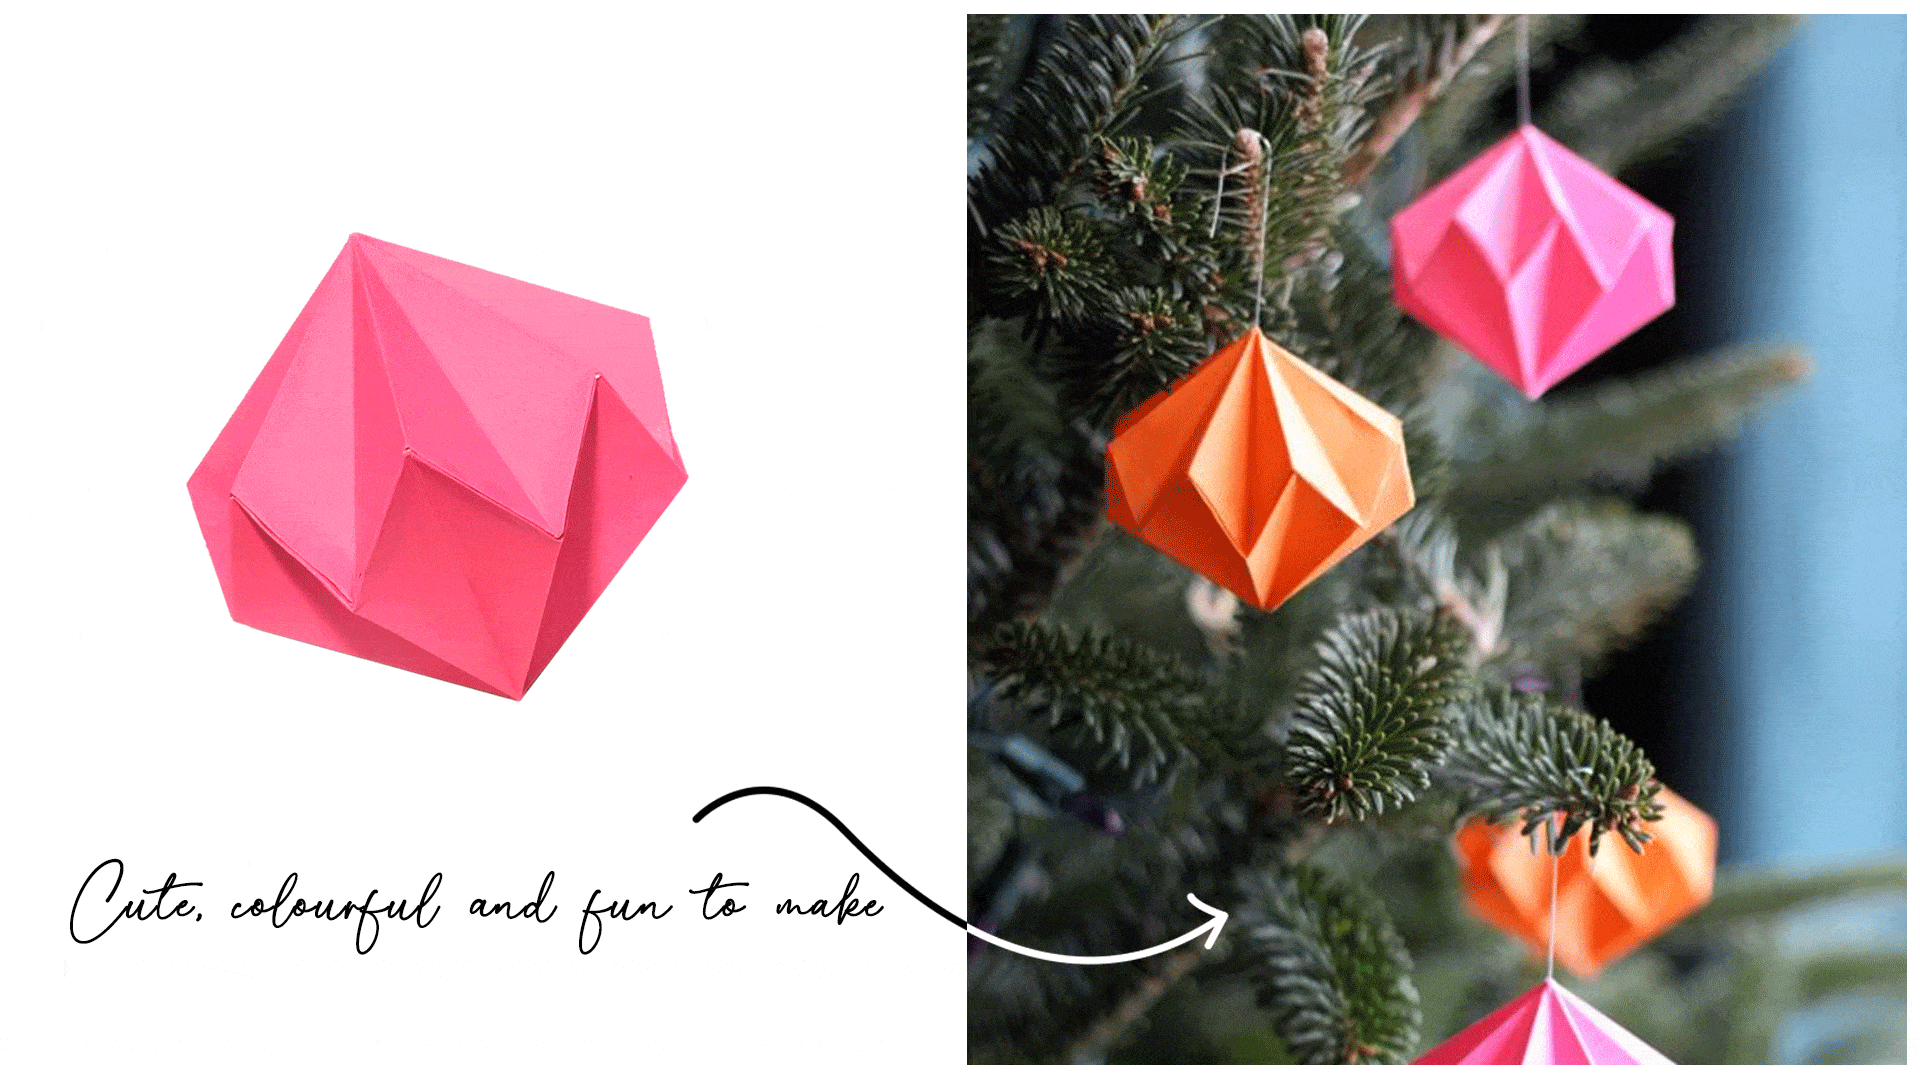 Split image of colourful paper ornaments